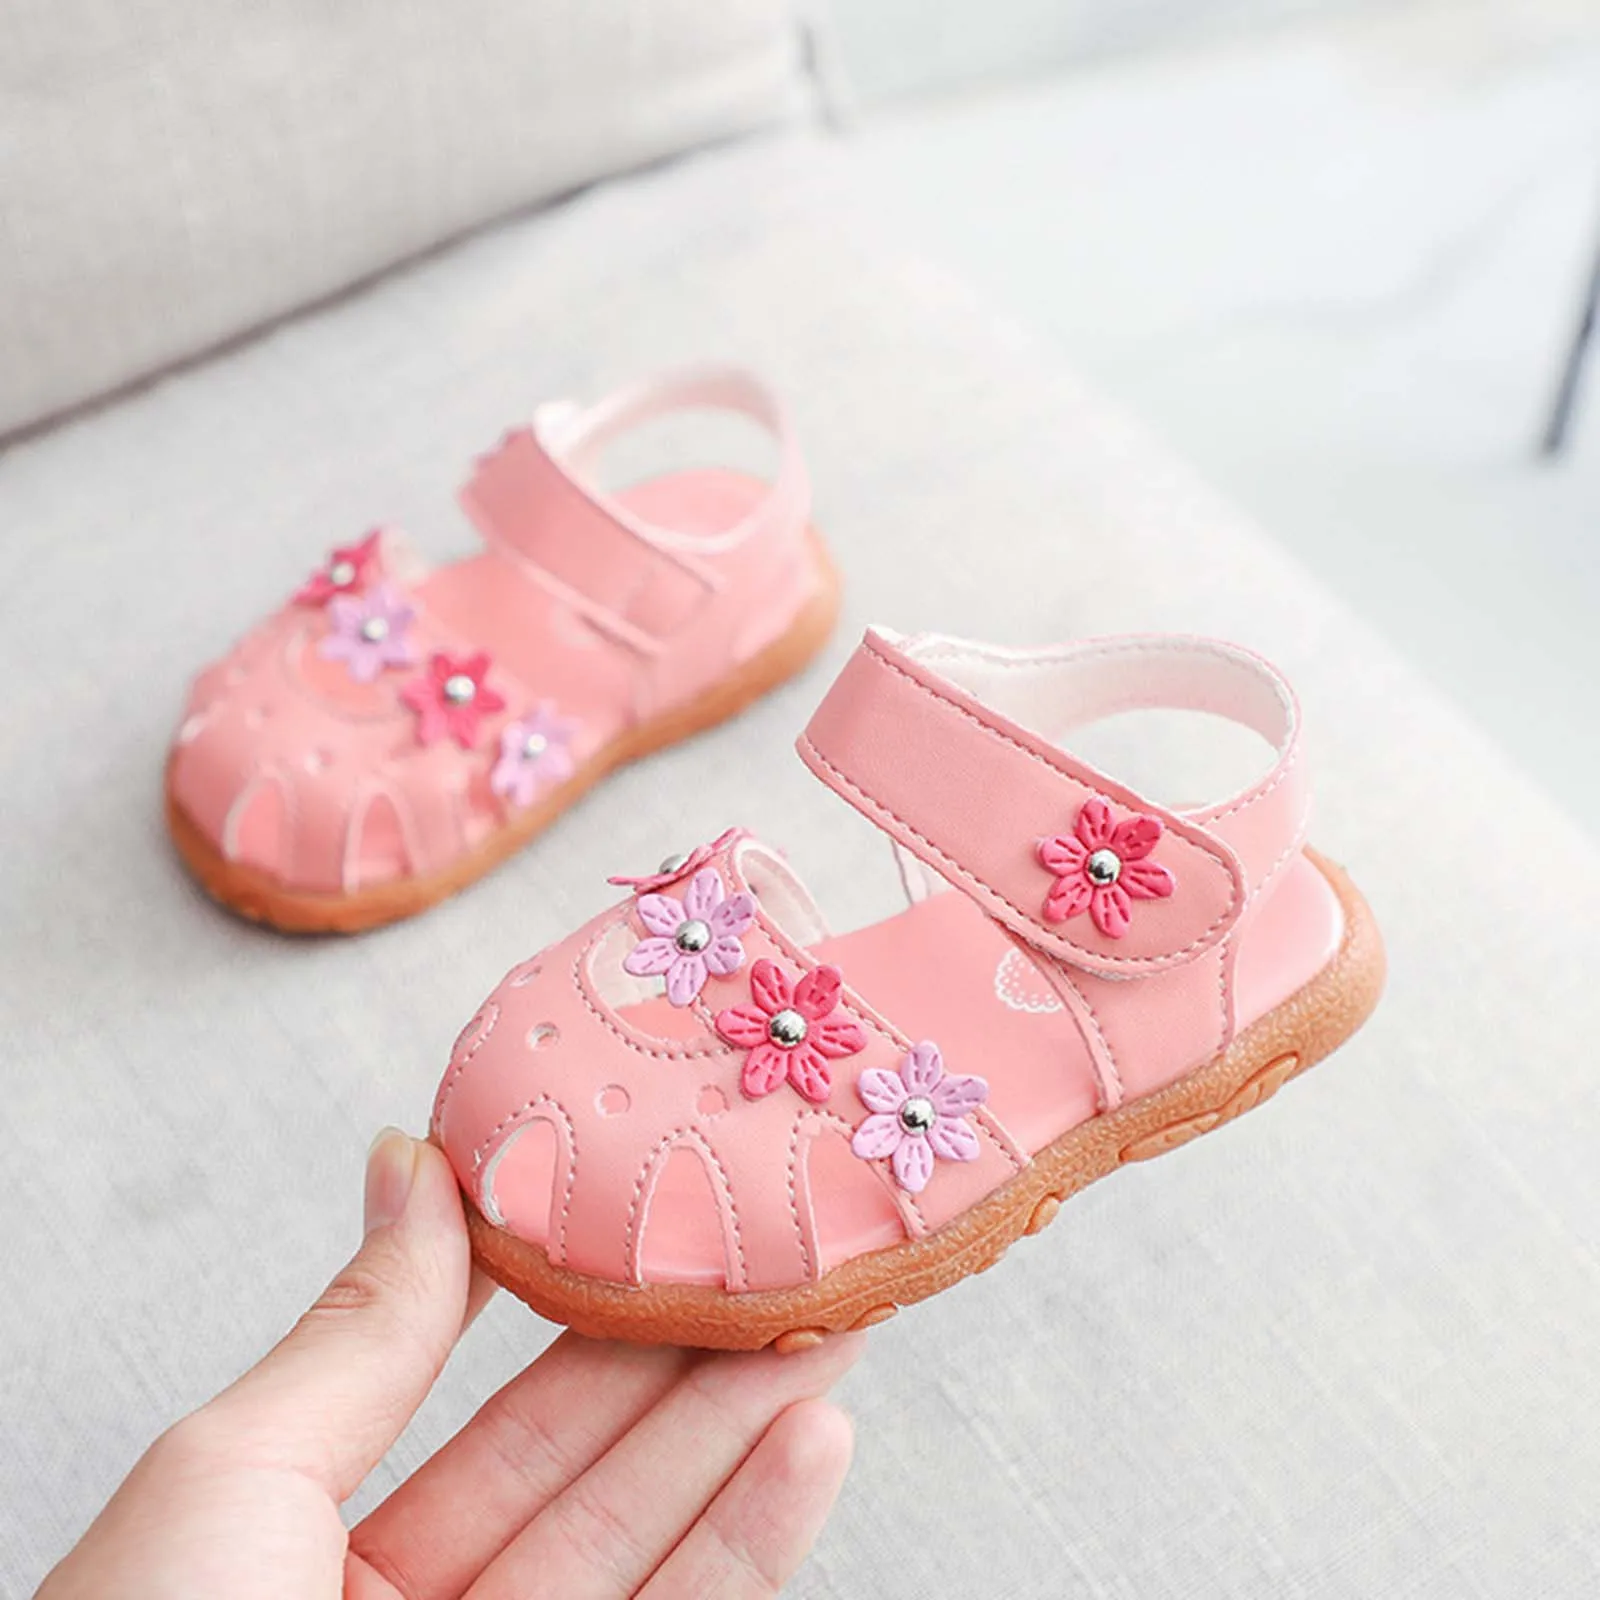 child shoes girl Kid Shoes Baby Girl Sandals 0-8T Infant Toddler Baby Kids Girls Flower Single Princess Party Shoes Sandals sandales Сандалии extra wide fit children's shoes